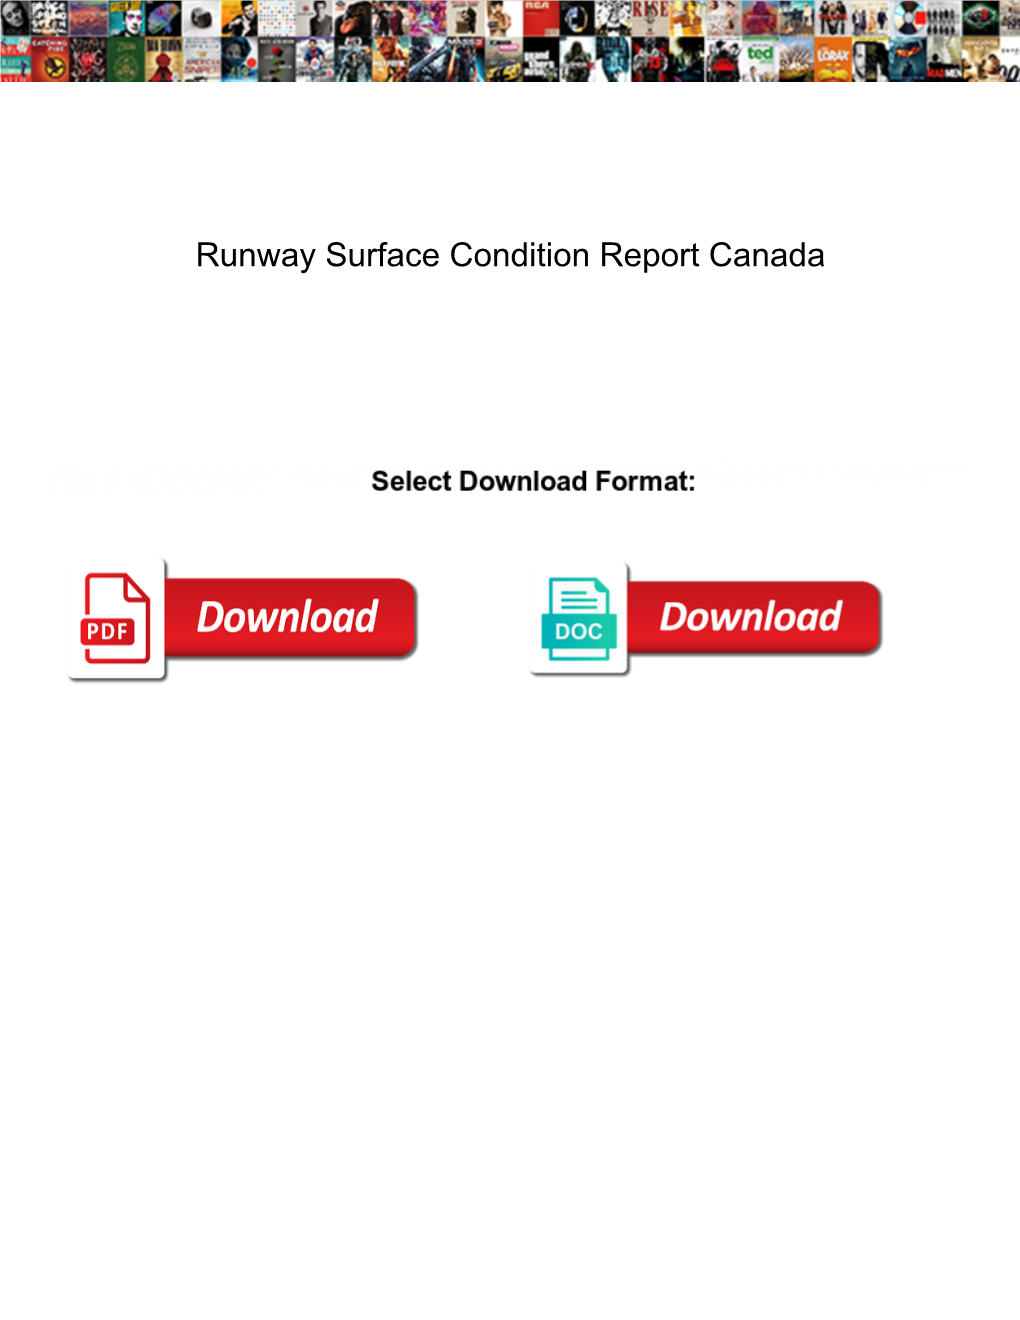 Runway Surface Condition Report Canada